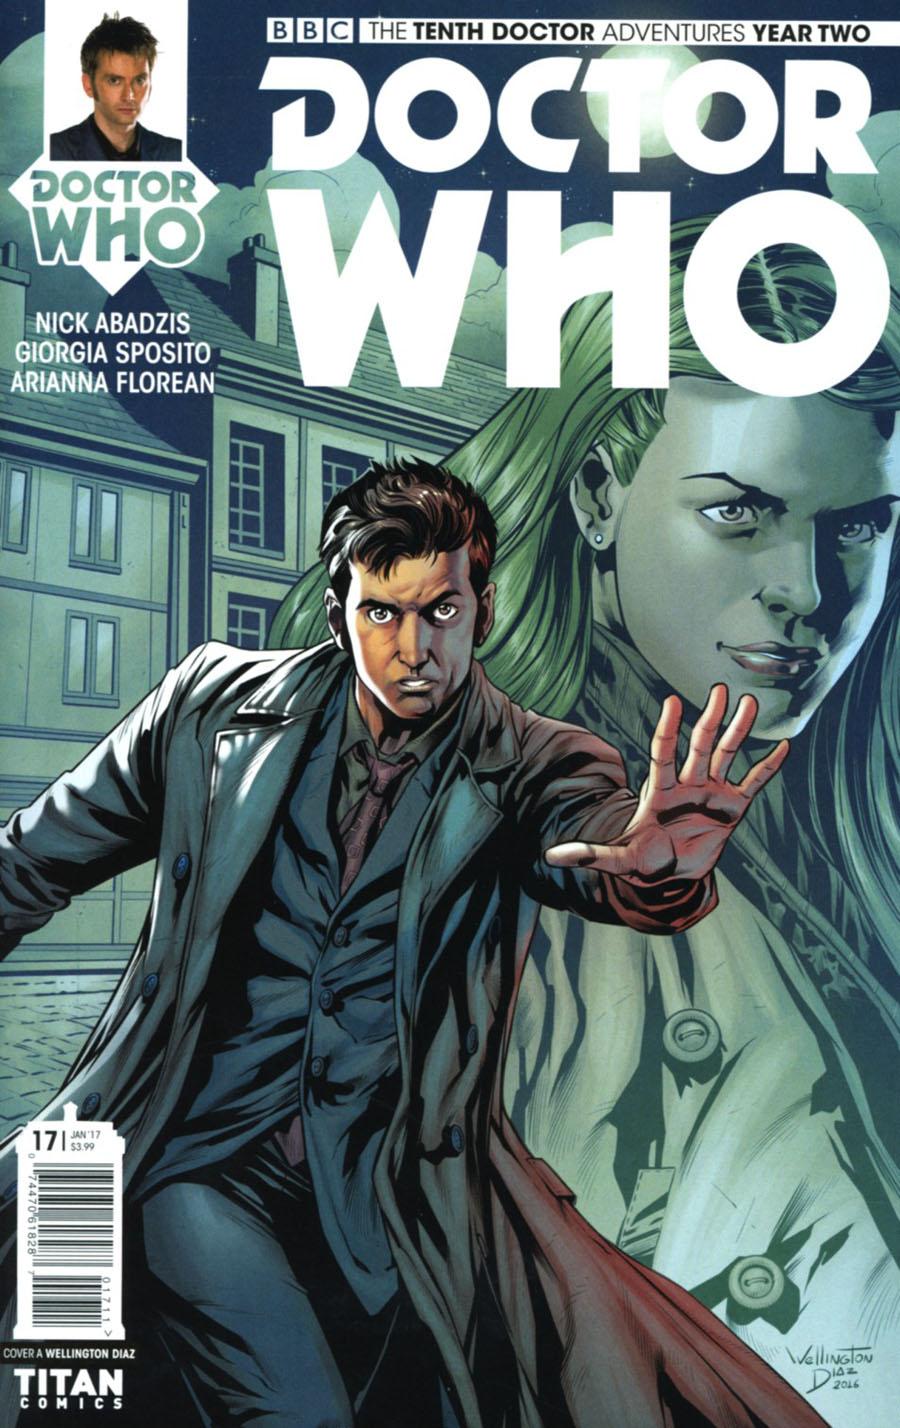 Doctor Who 10th Doctor Year Two Vol. 1 #17